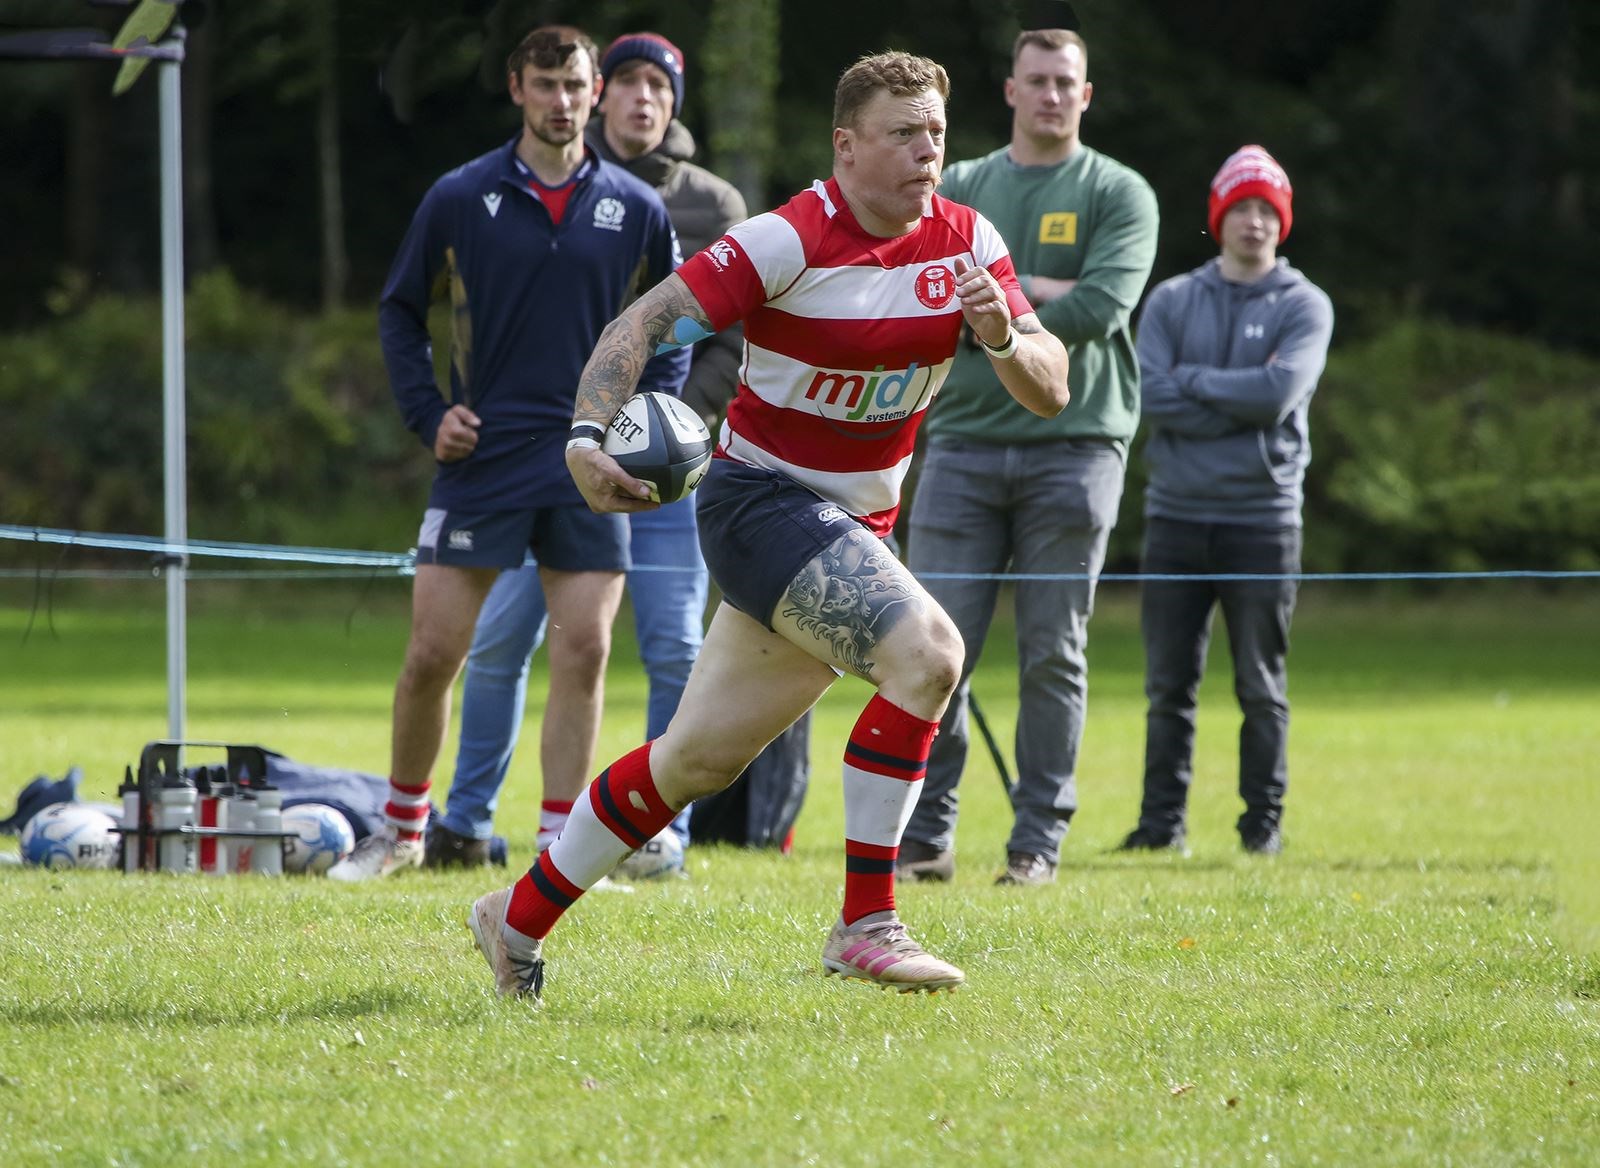 Lewis Scott gets ready to take on the opposition defence. Picture: John MacGregor